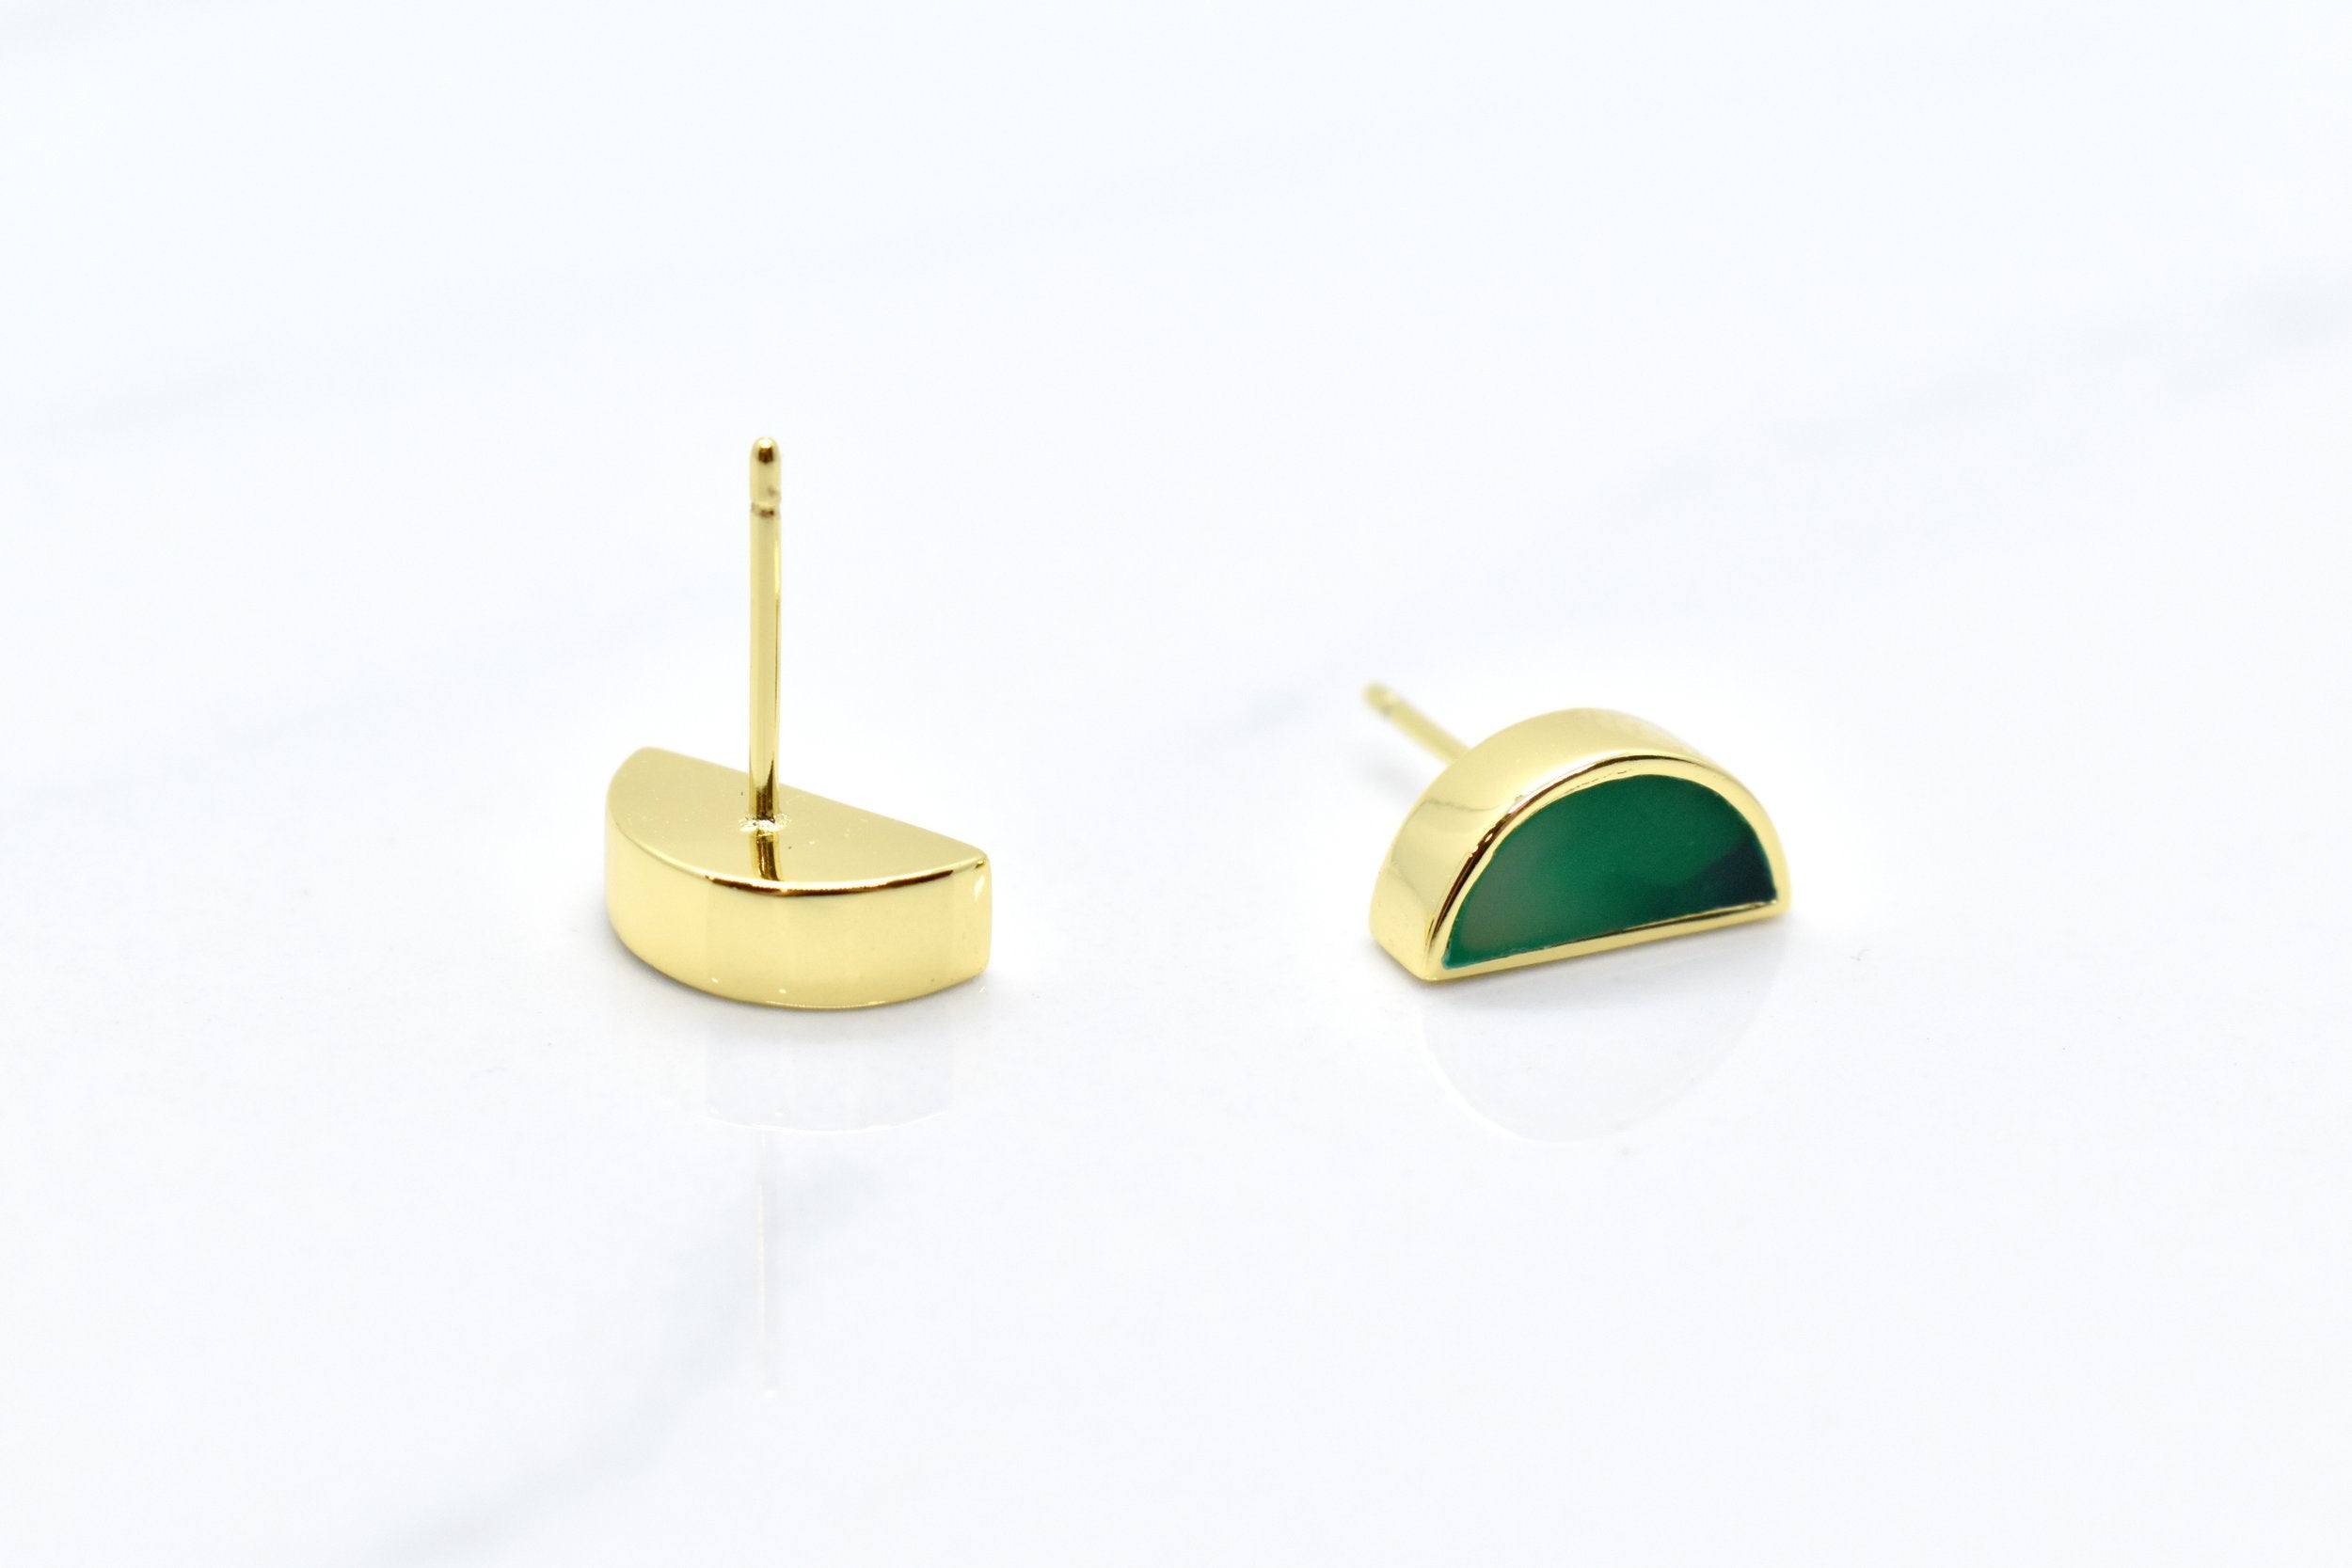 bright emerald green marbled tiny halfmoon earrings with 14k gold plating on sterling silver posts shown on white background